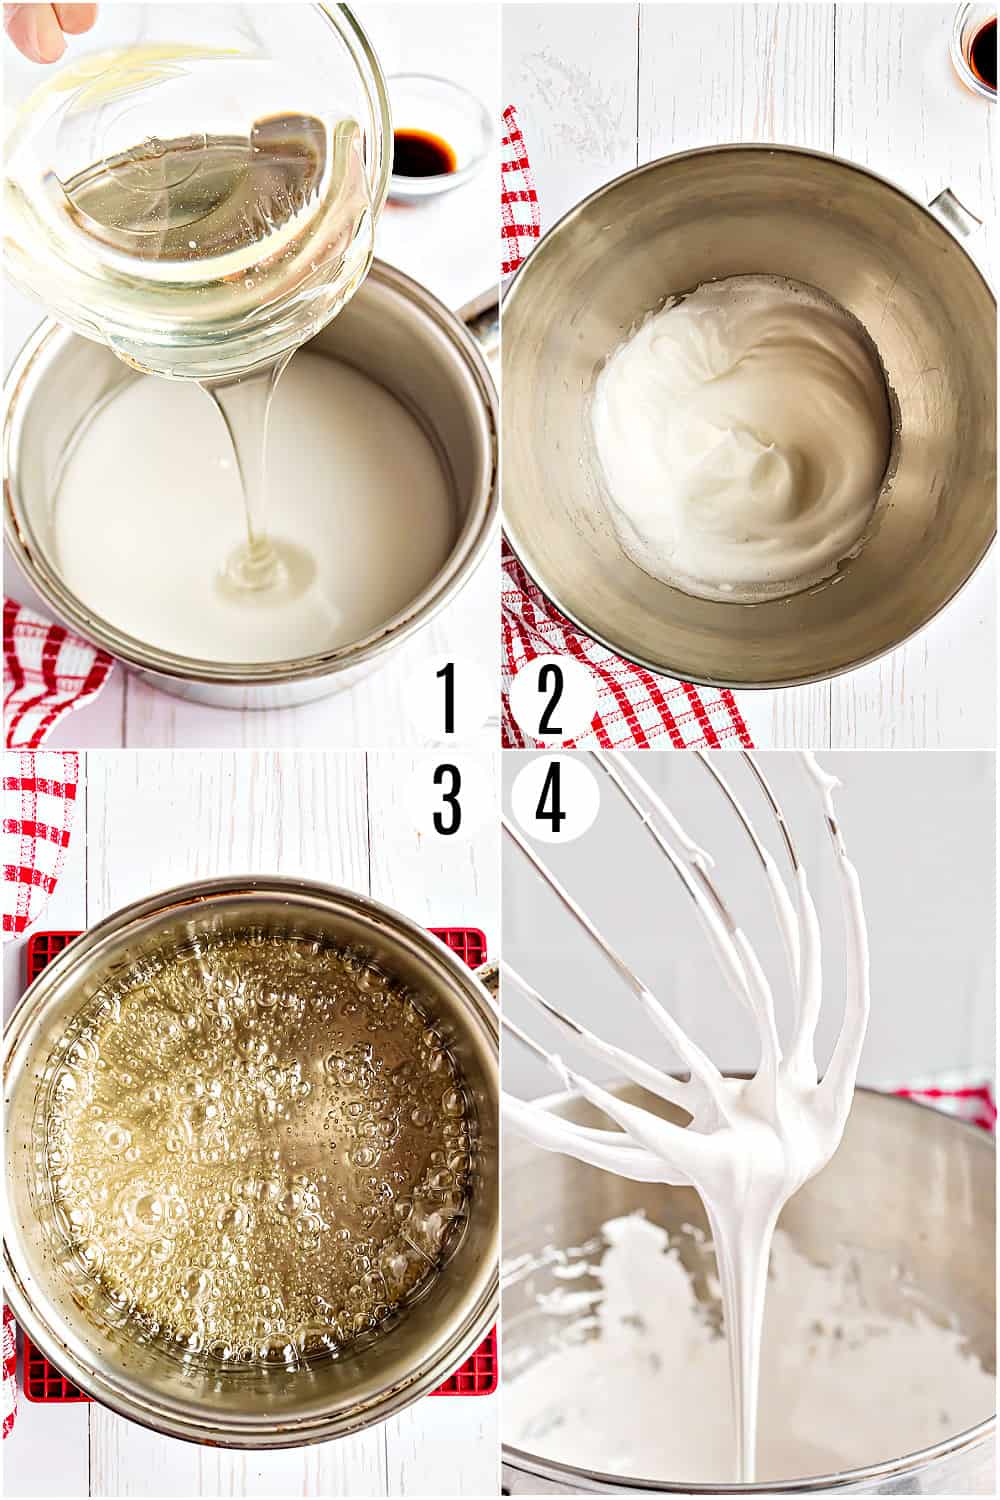 Step by step photos showing how to make marshmallow cream.